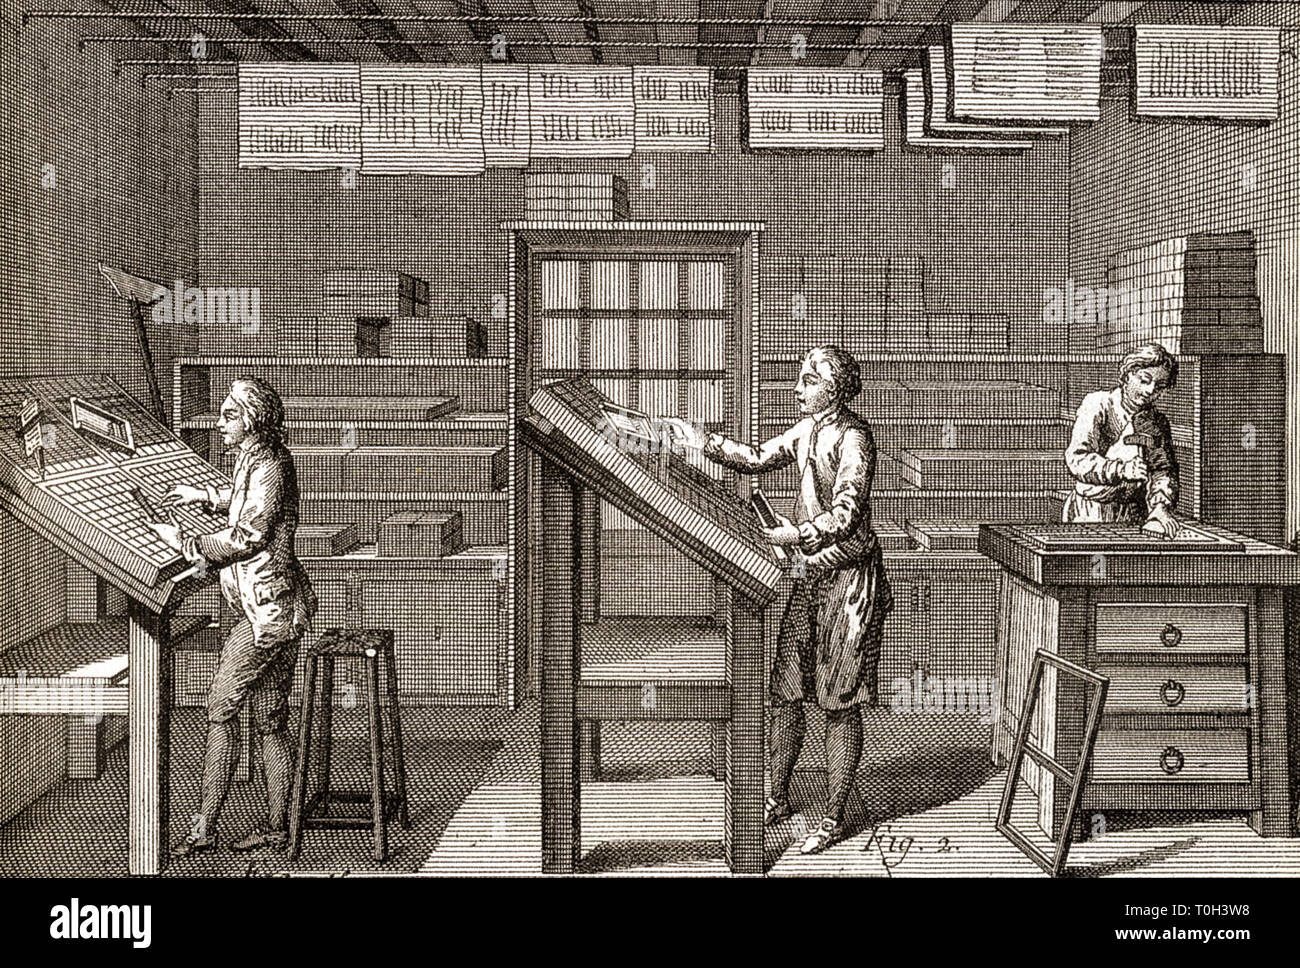 18th century printing press from the 'Encyclopedie' of D'Alambert and Diderot Stock Photo